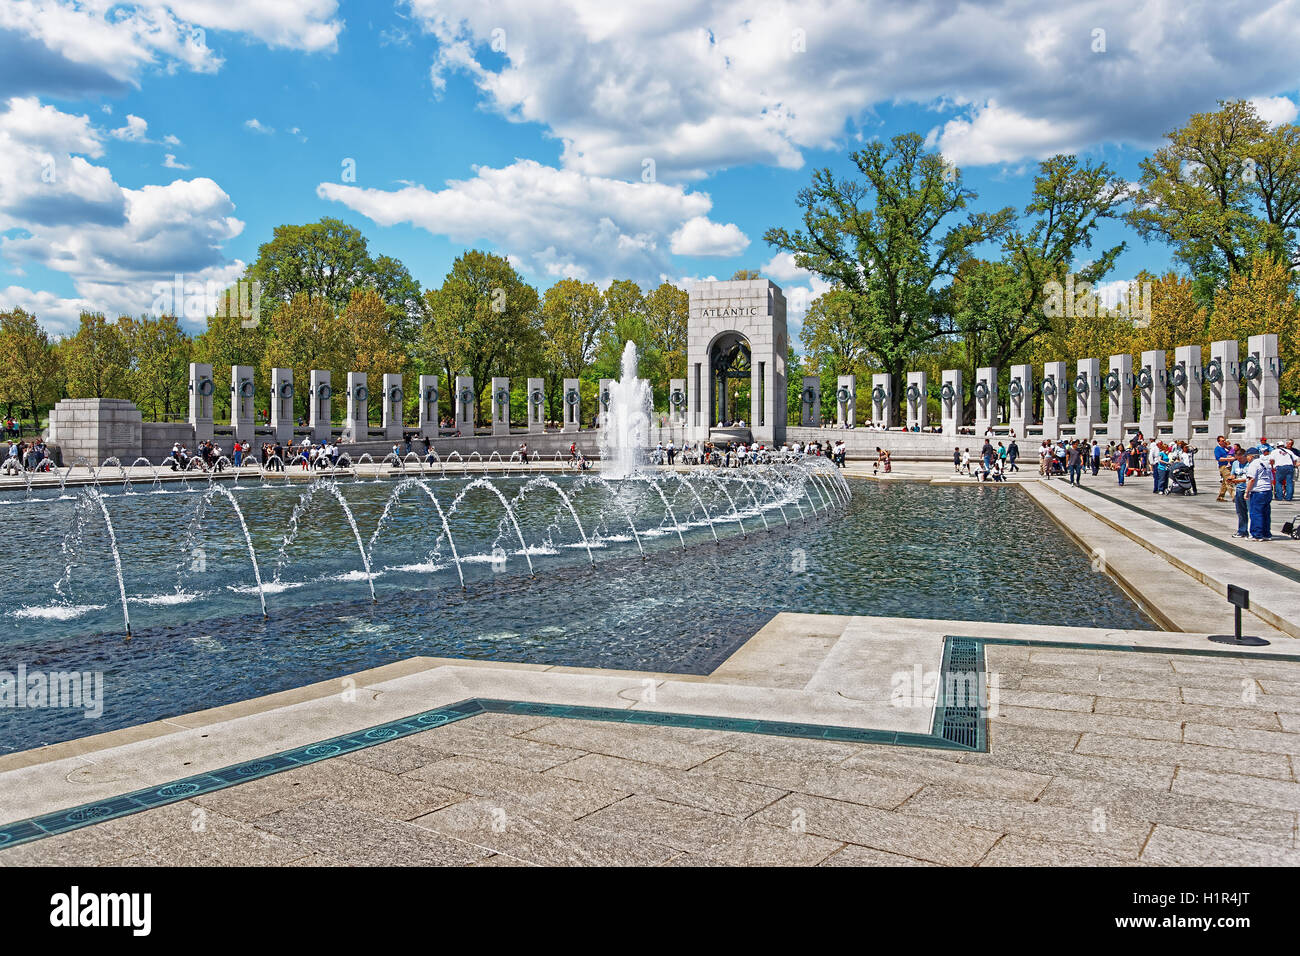 Washington D.C., USA - May 2, 2015: National World War II Memorial is the dedication to all soldiers who died and participated in the WWII. The memorial is one of the main symbols of freedom. Stock Photo